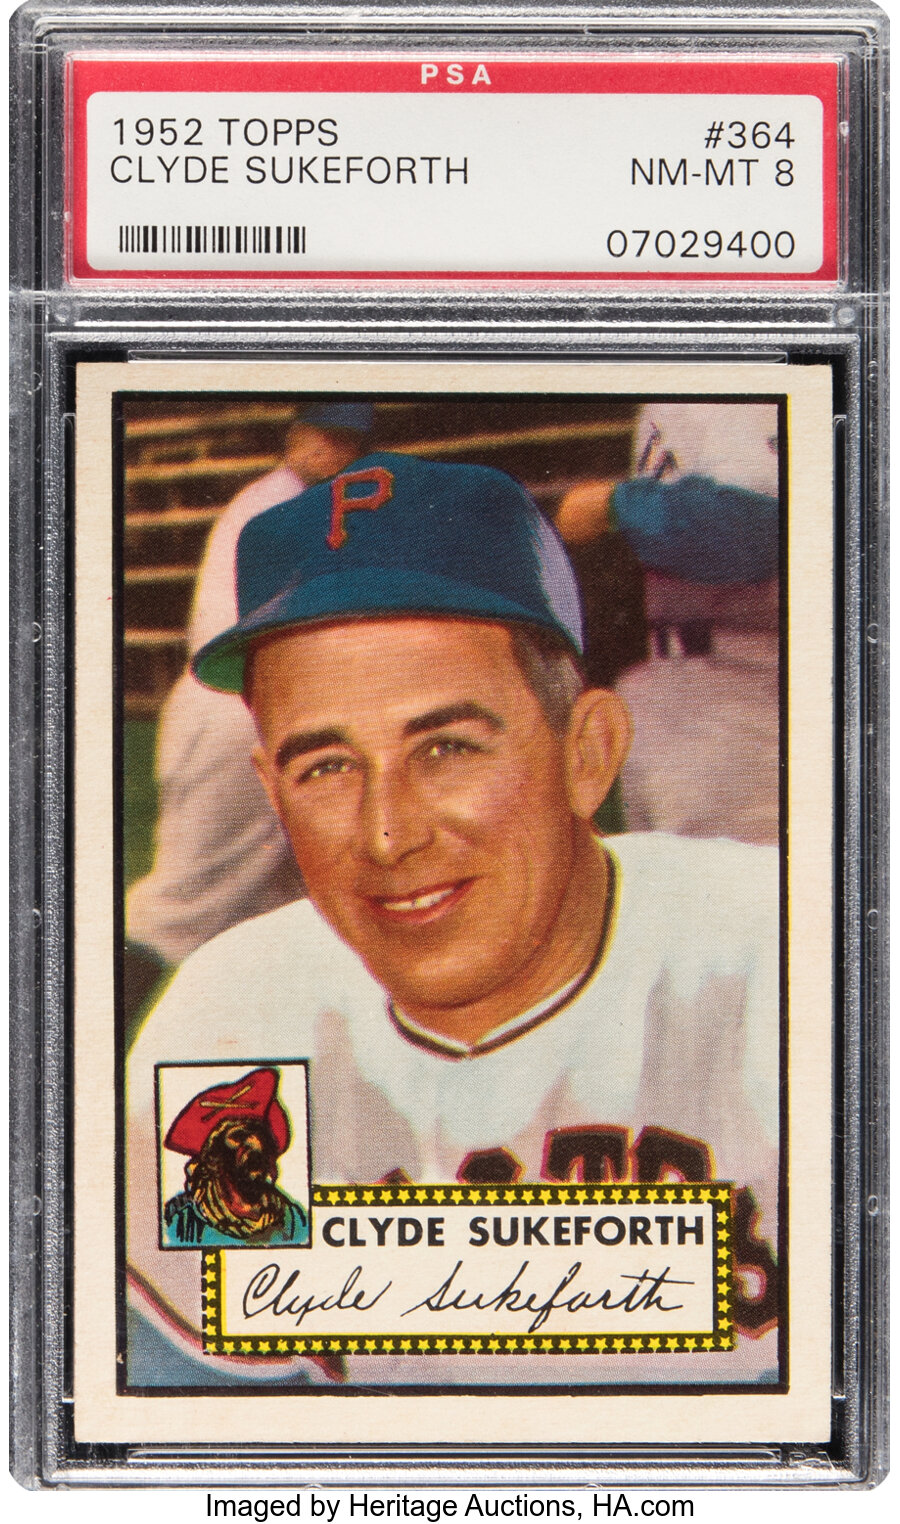 1952 Topps Clyde Sukeforth Rookie #364 PSA NM-MT 8